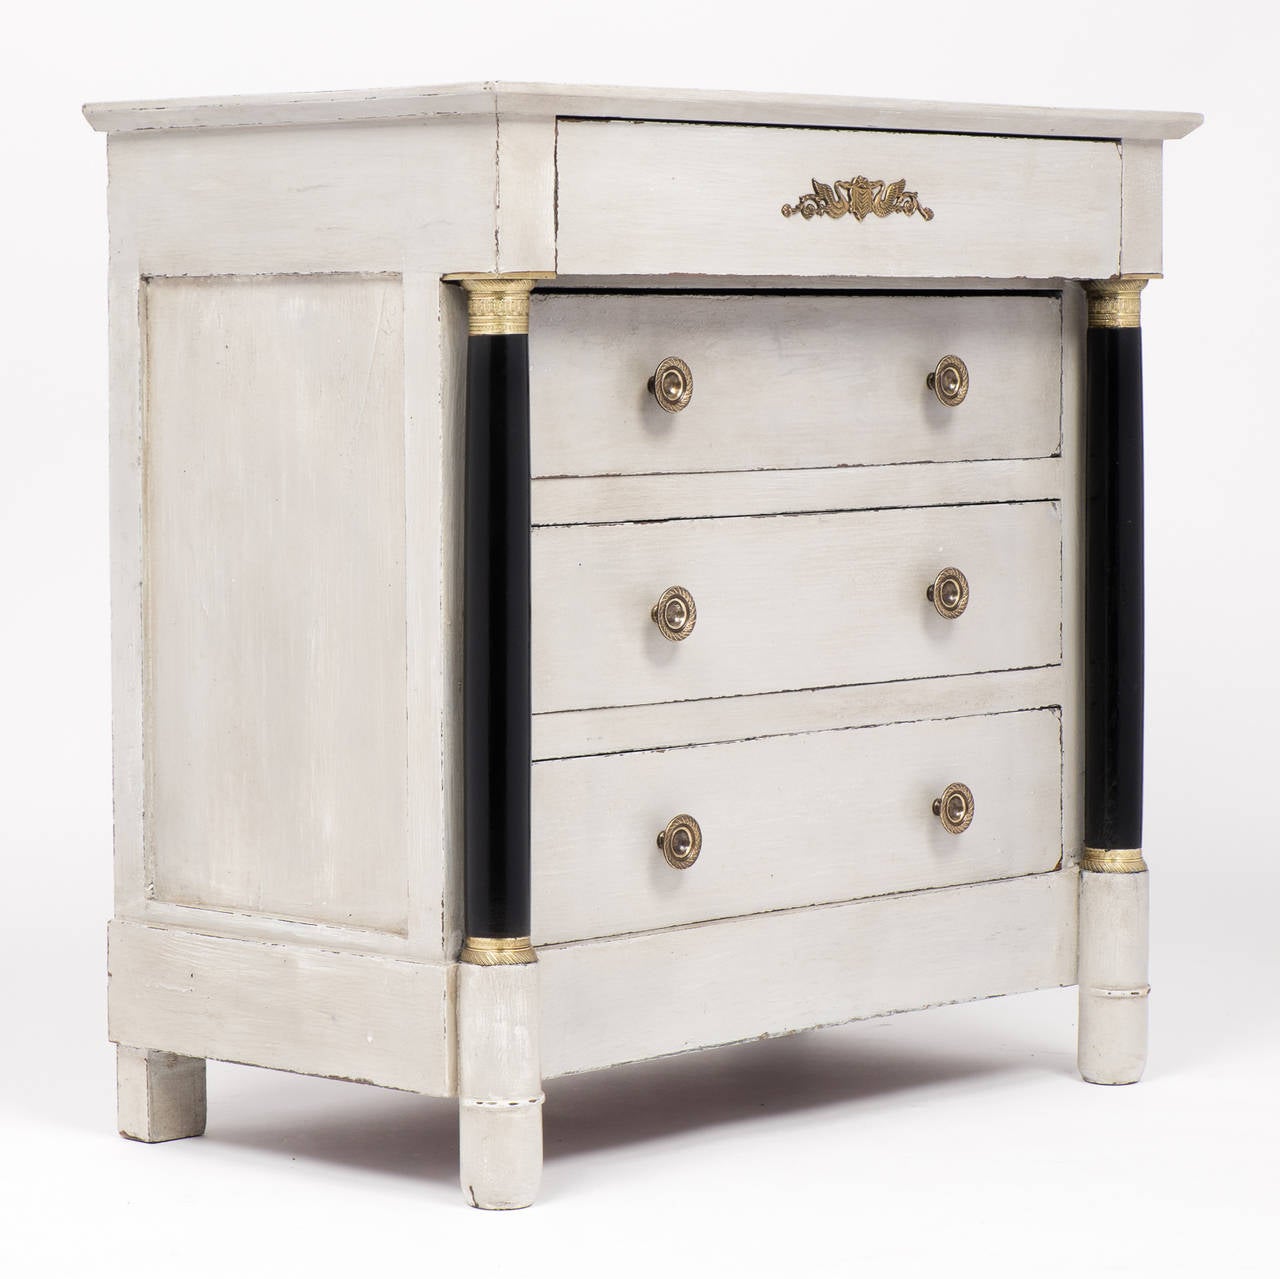 Antique French Empire style chest of drawers with swan bronze detail, four dovetailed drawers, and two ebonized columns with finely cast brass capitals. Superb craftsmanship, proportions. We could not resist the decorative impact.